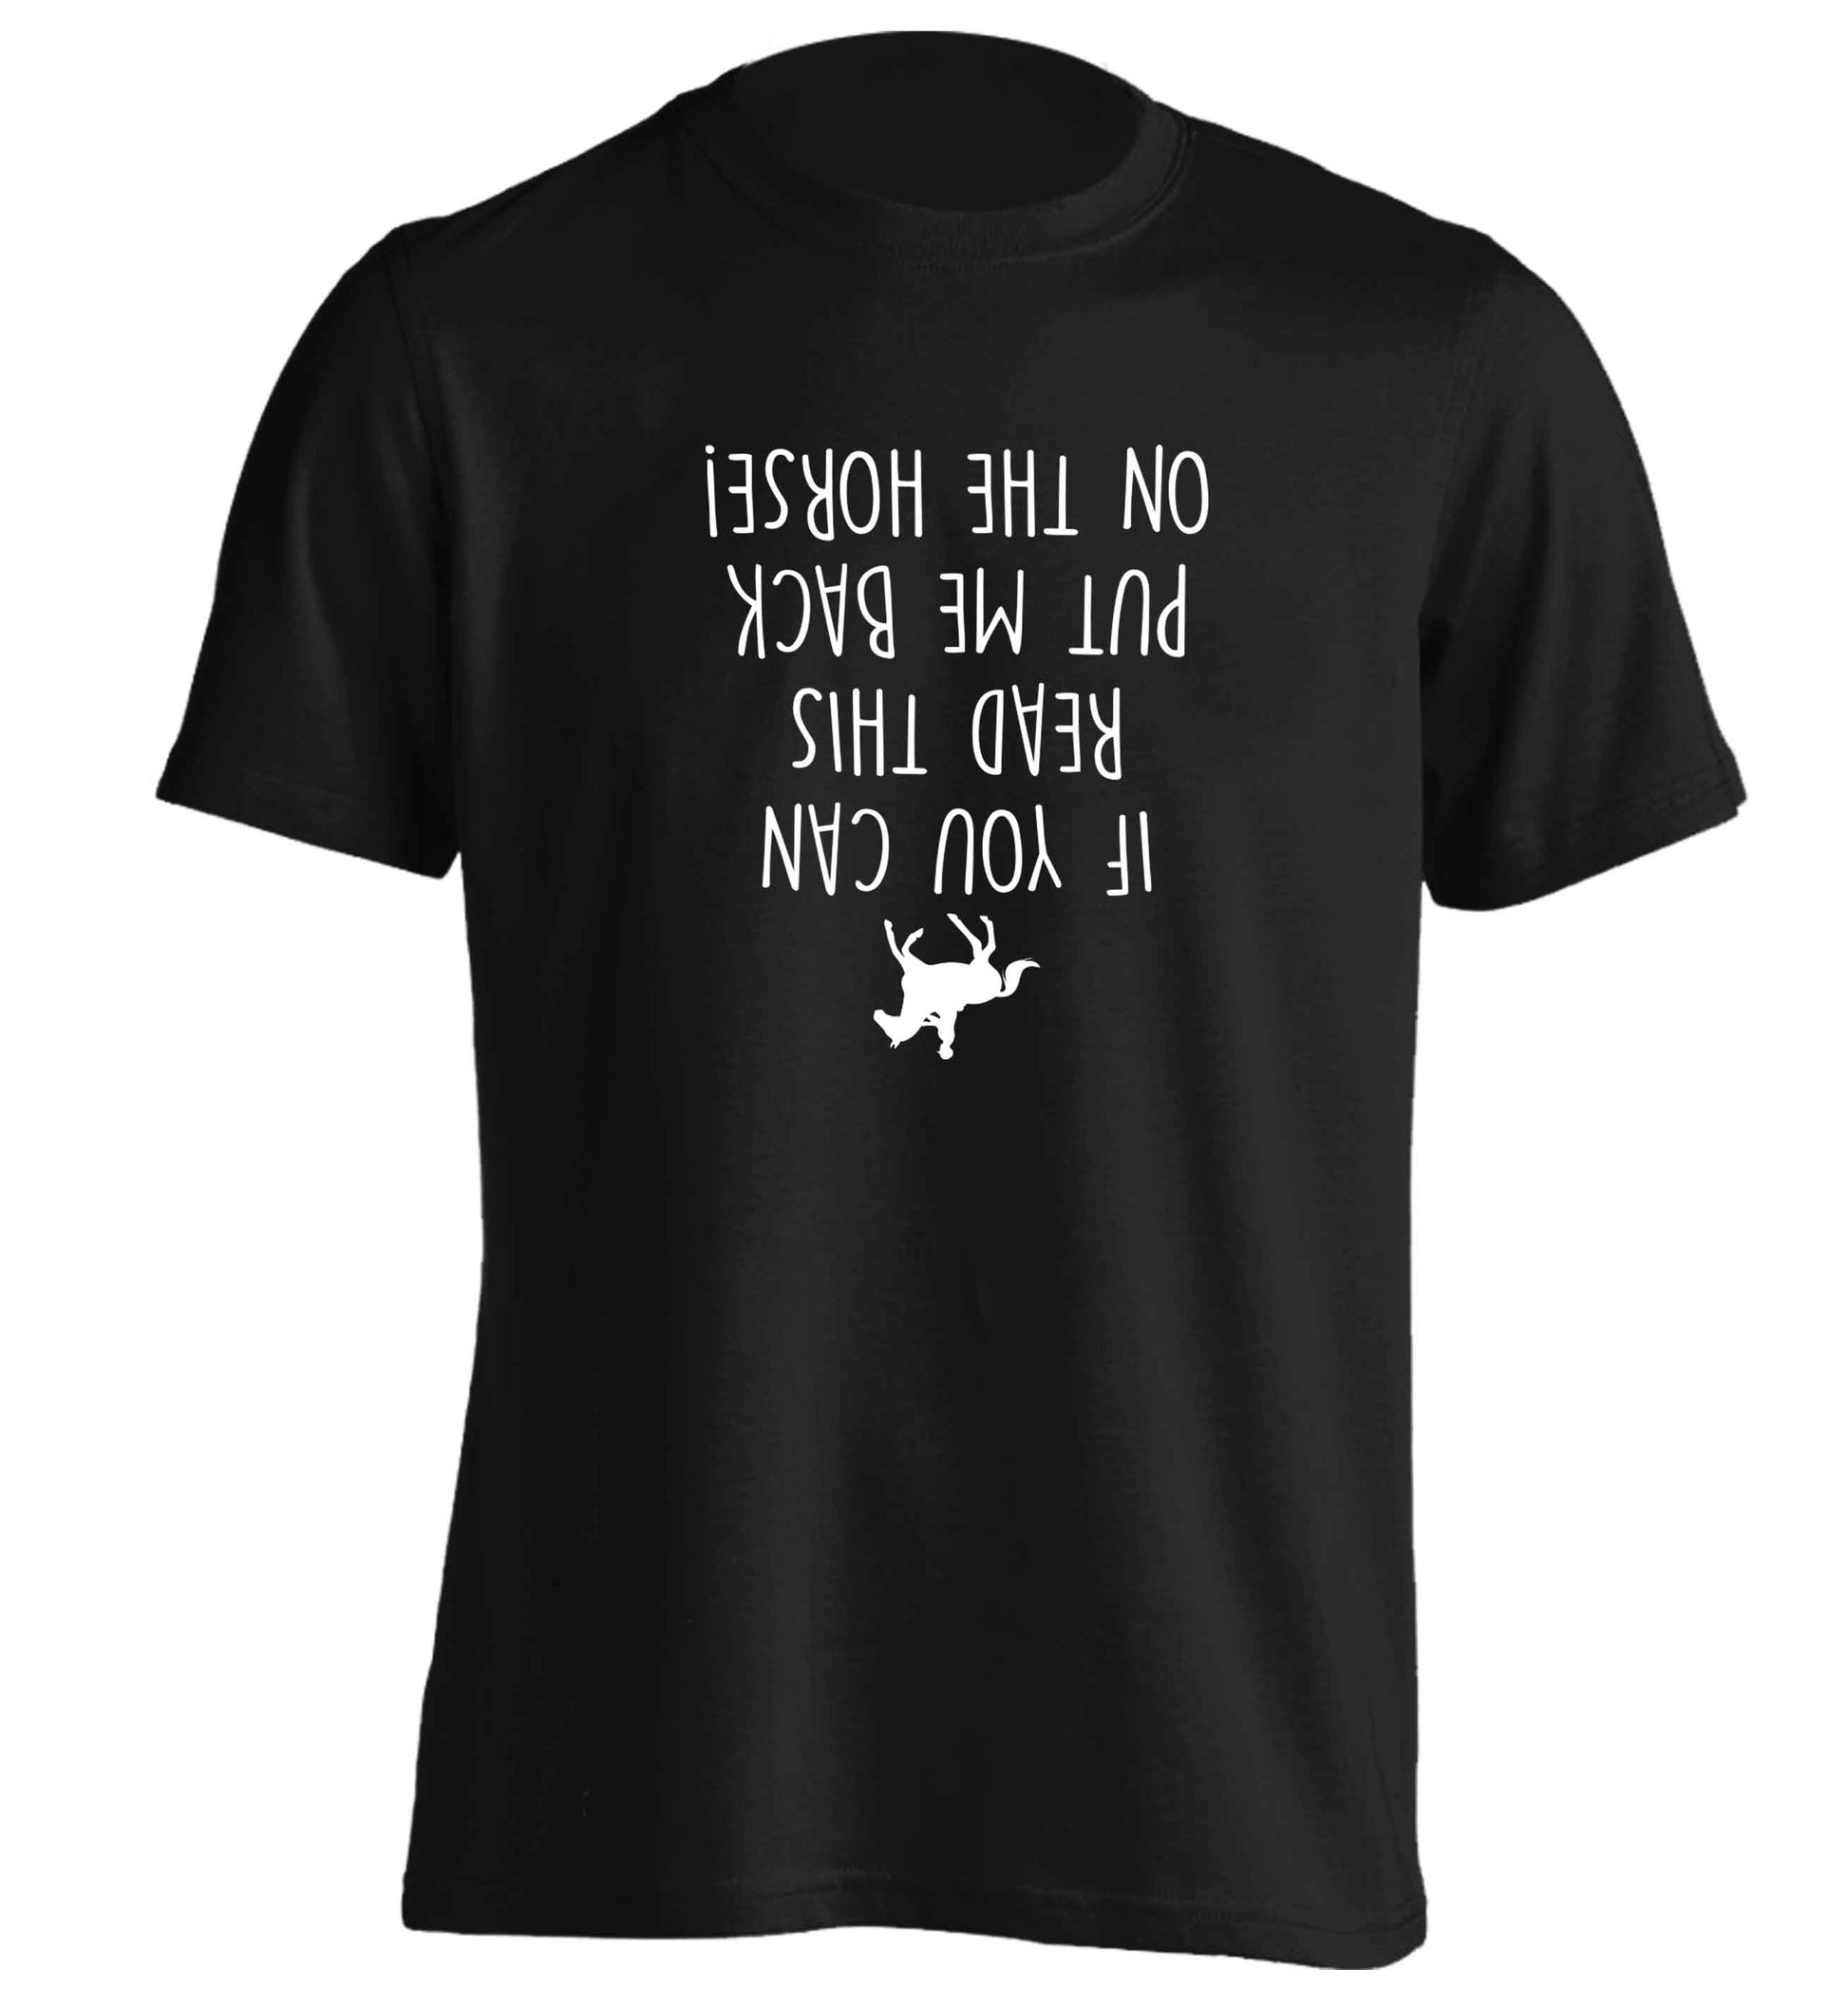 If you can read this put me back on the horse adults unisex black Tshirt 2XL